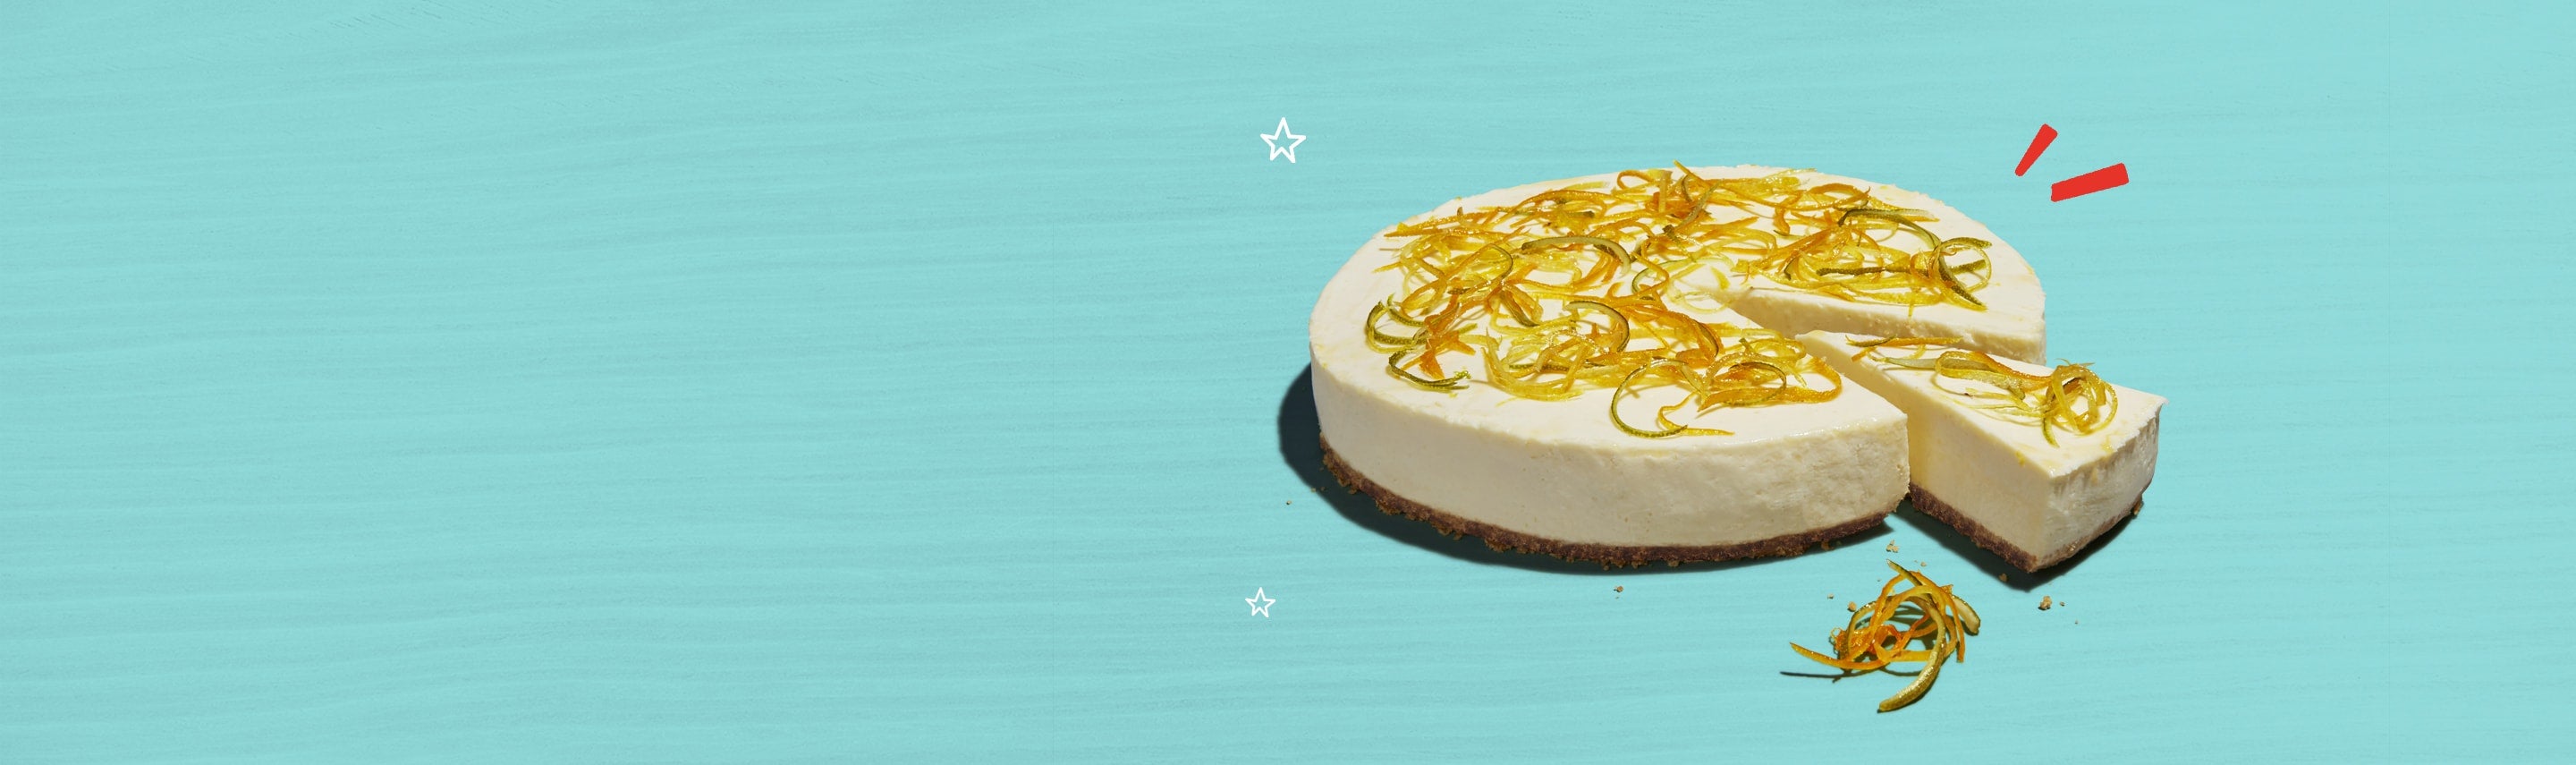 Easy Candied Citrus Cheesecake